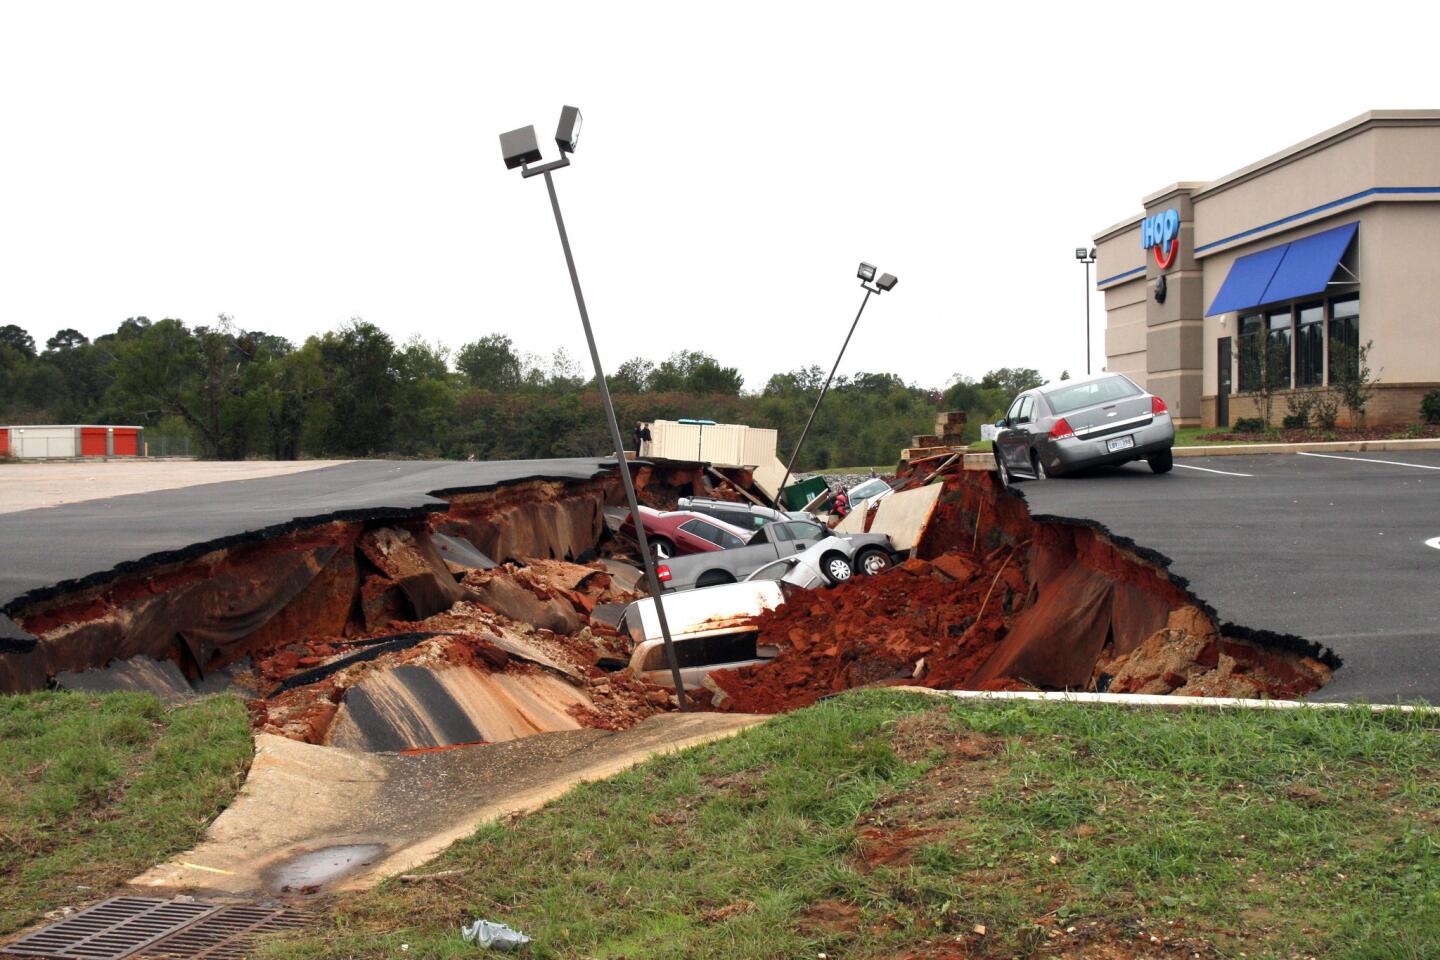 This photo shows vehicles after a cave-in of a restaurant parking lot in Meridian, Miss., Sunday, Nov. 8, 2015. Experts are to begin work Monday seeking to determine the cause of the Saturday collapse, authorities said.